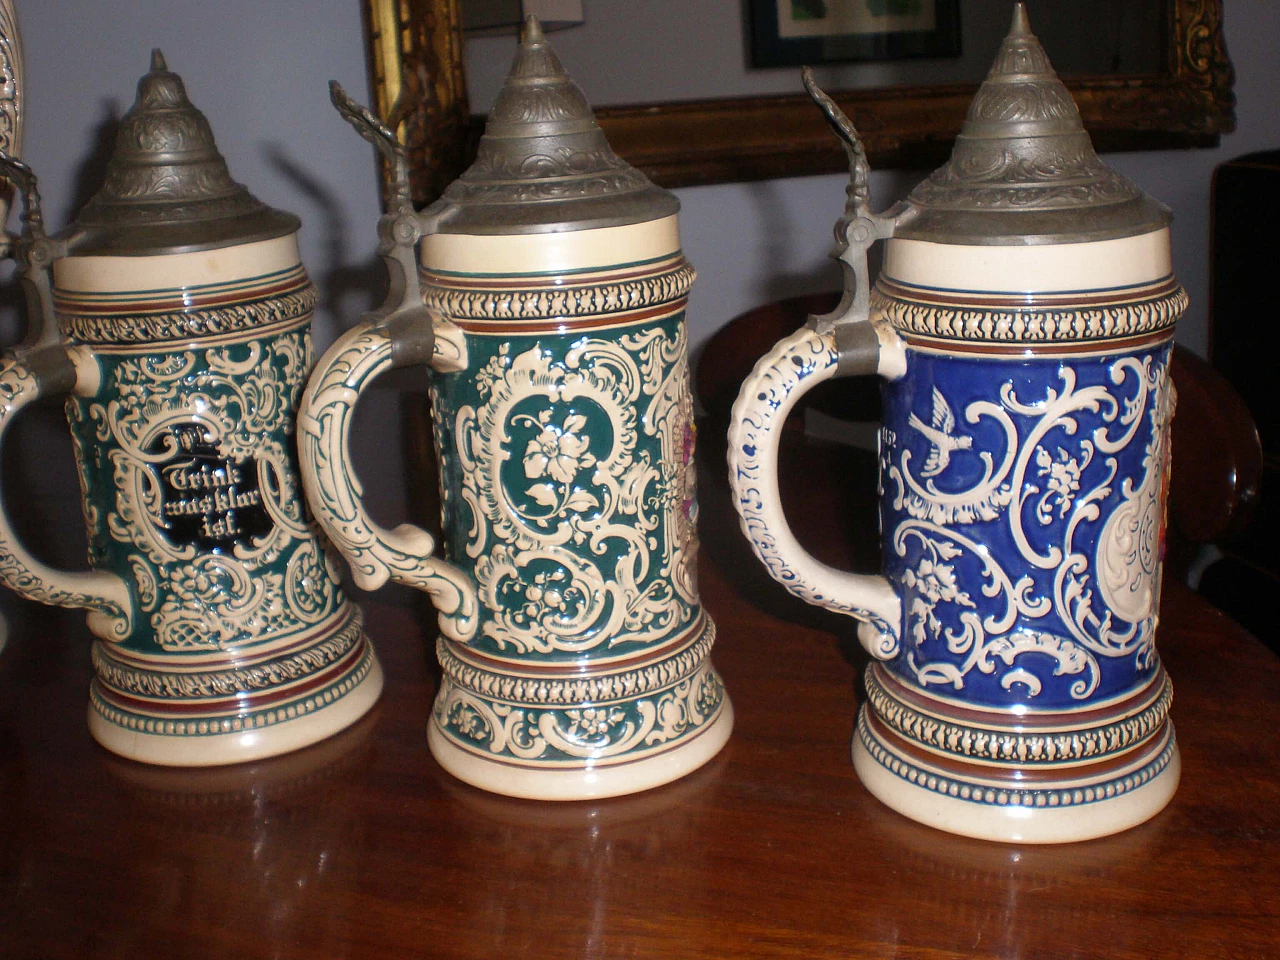 6 Ceramic beer mugs and pitcher, 19th century 4